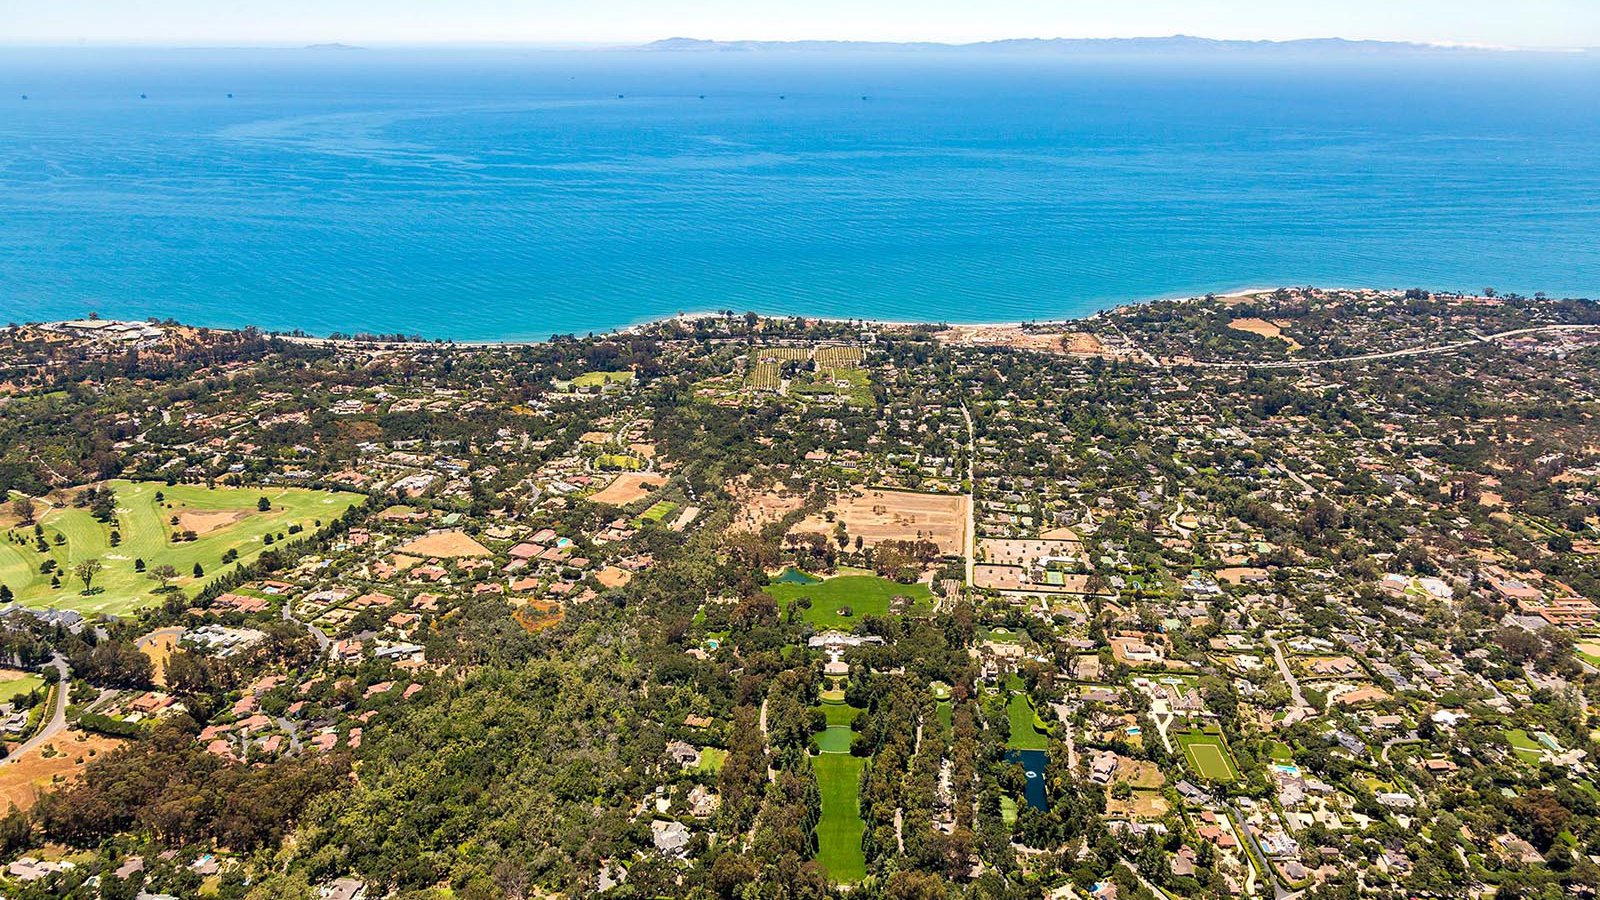 Residential celebrity real estate photo of Oprah Winfrey's The Promised Land home in Montecito, California with Anacapa and Santa Cruz Islands in the background